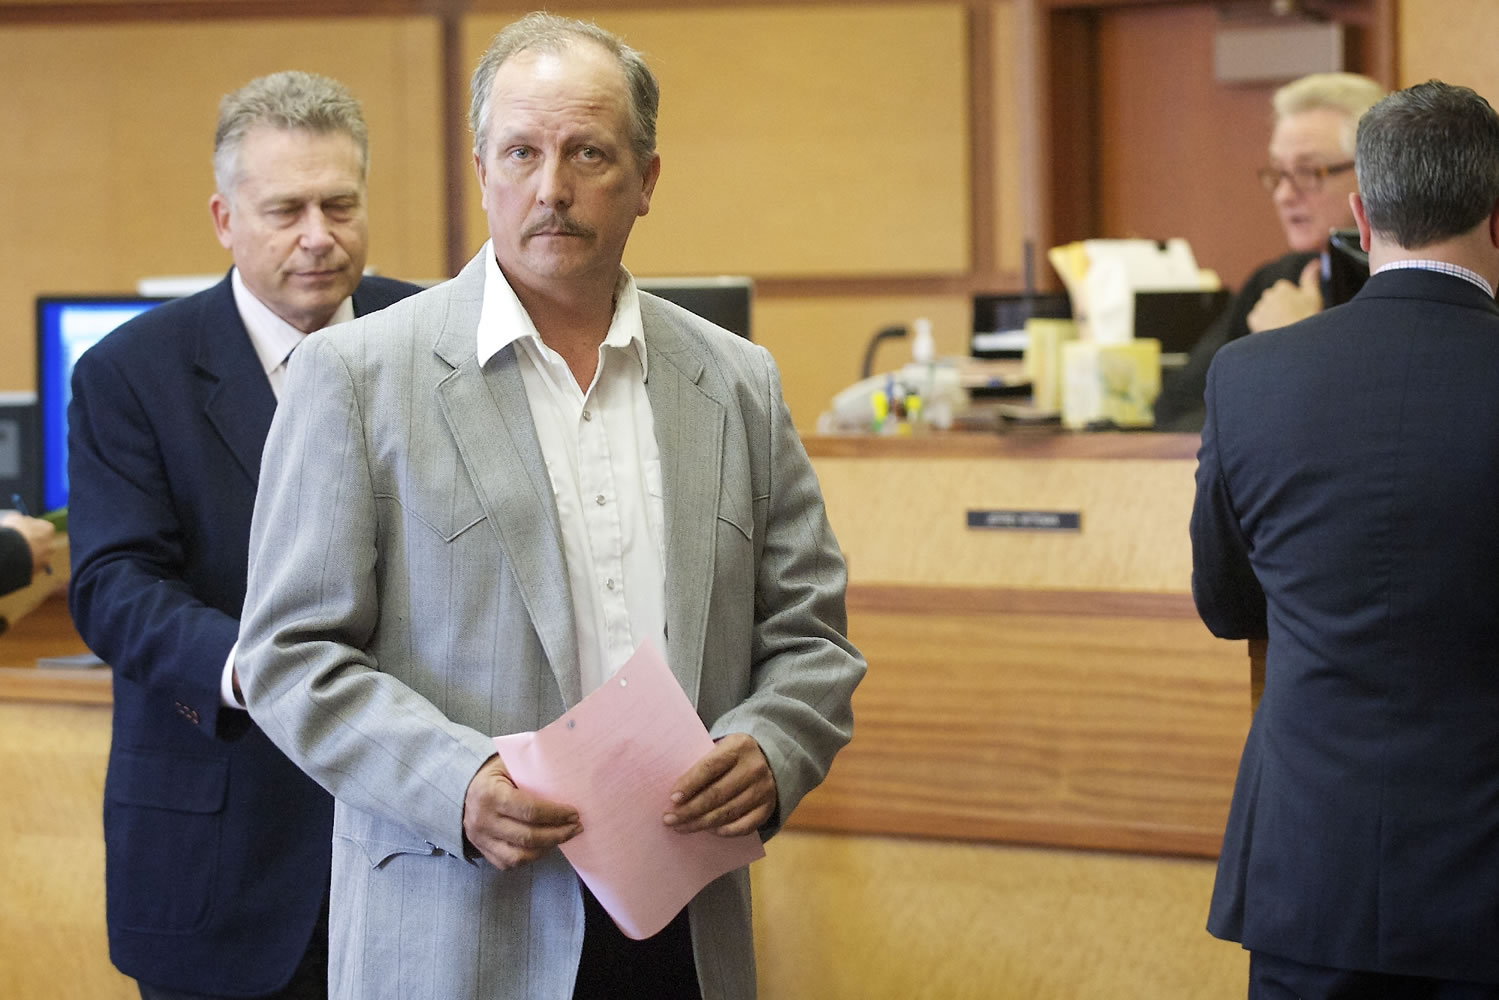 Jeffrey Barton, 52, of Vancouver appeared in Clark County District Tuesday to delay his case until November.